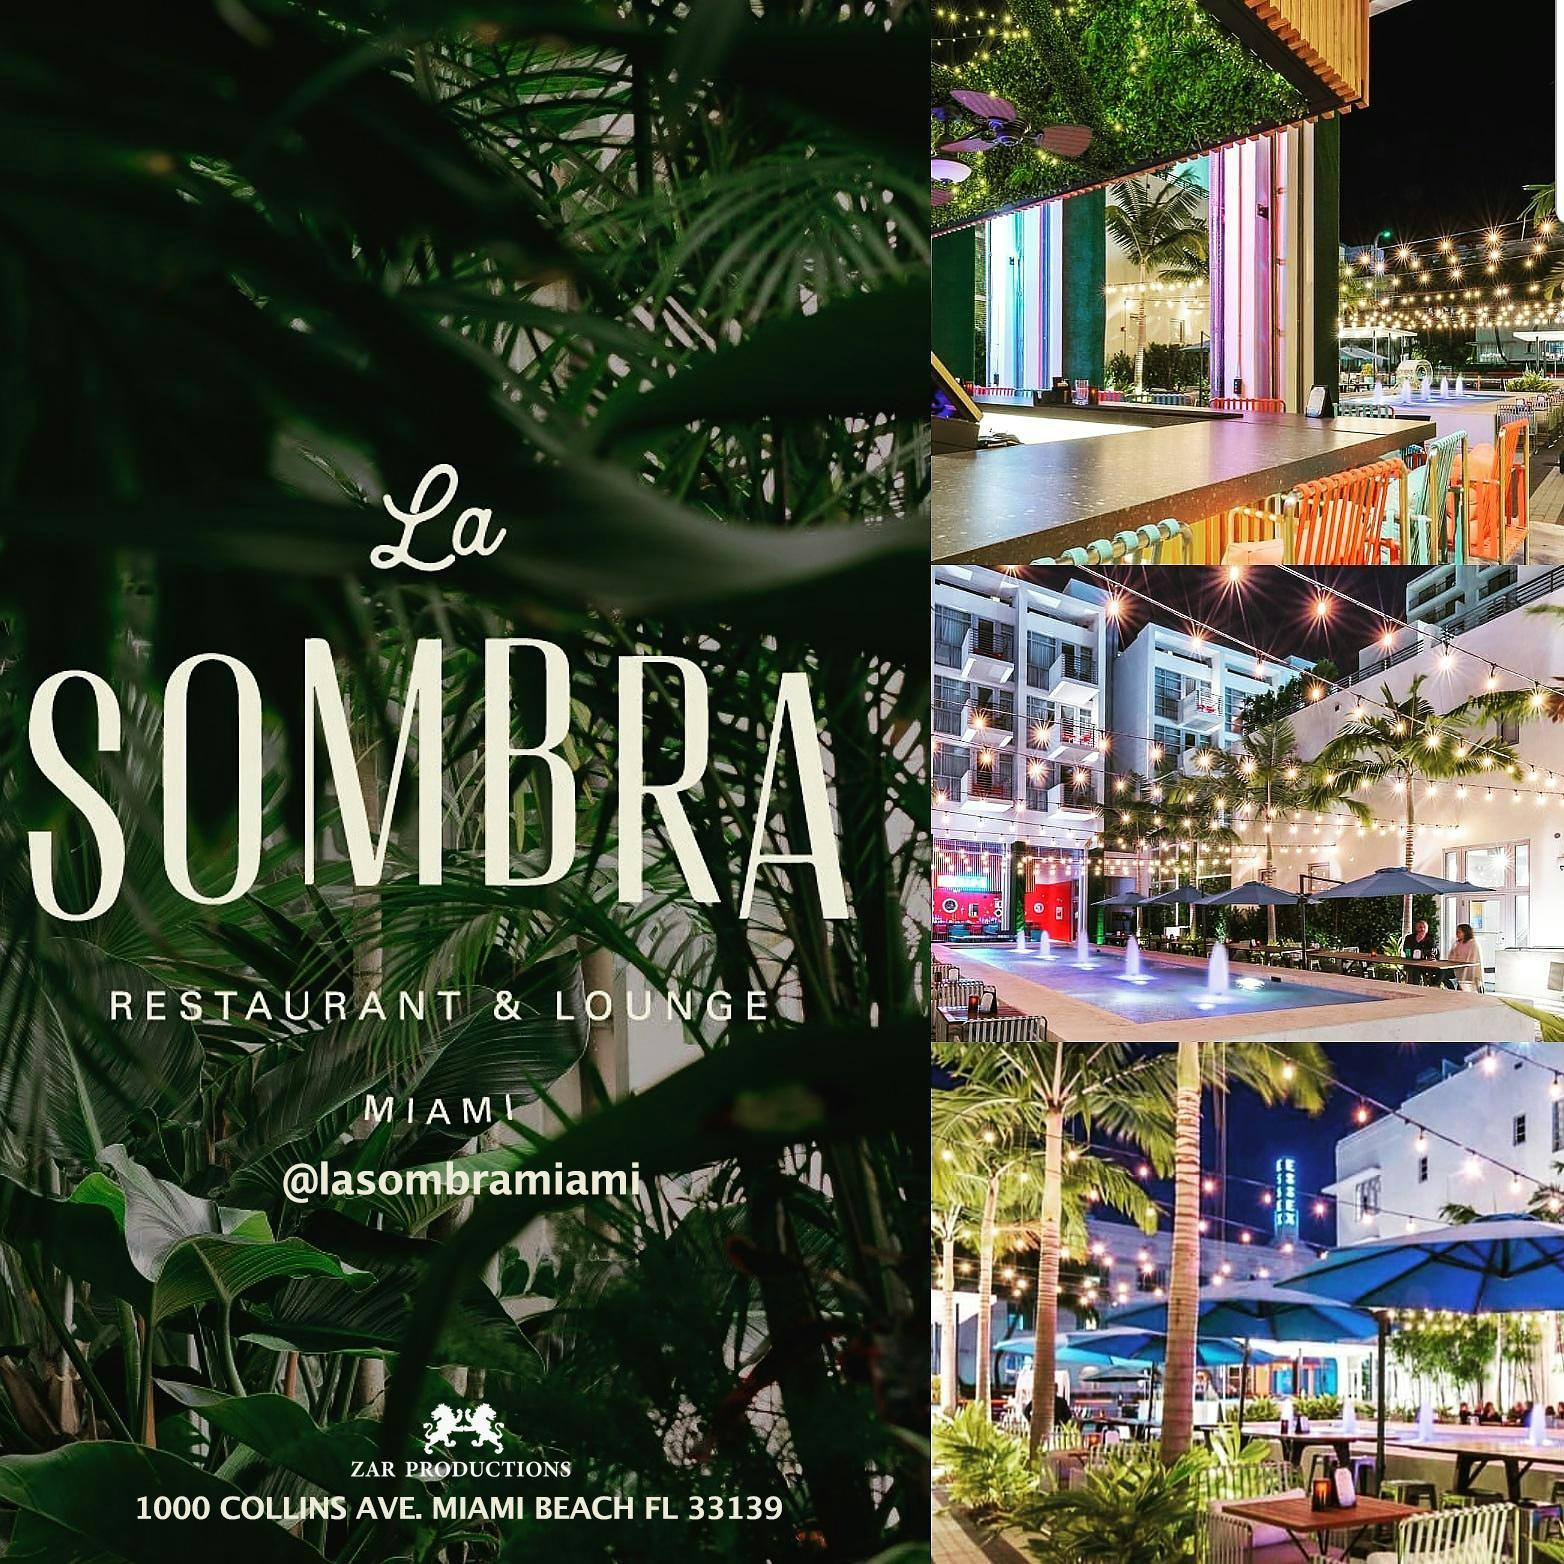 Dinner Party at La Sombra Restaurant & Lounge on Miami Beach